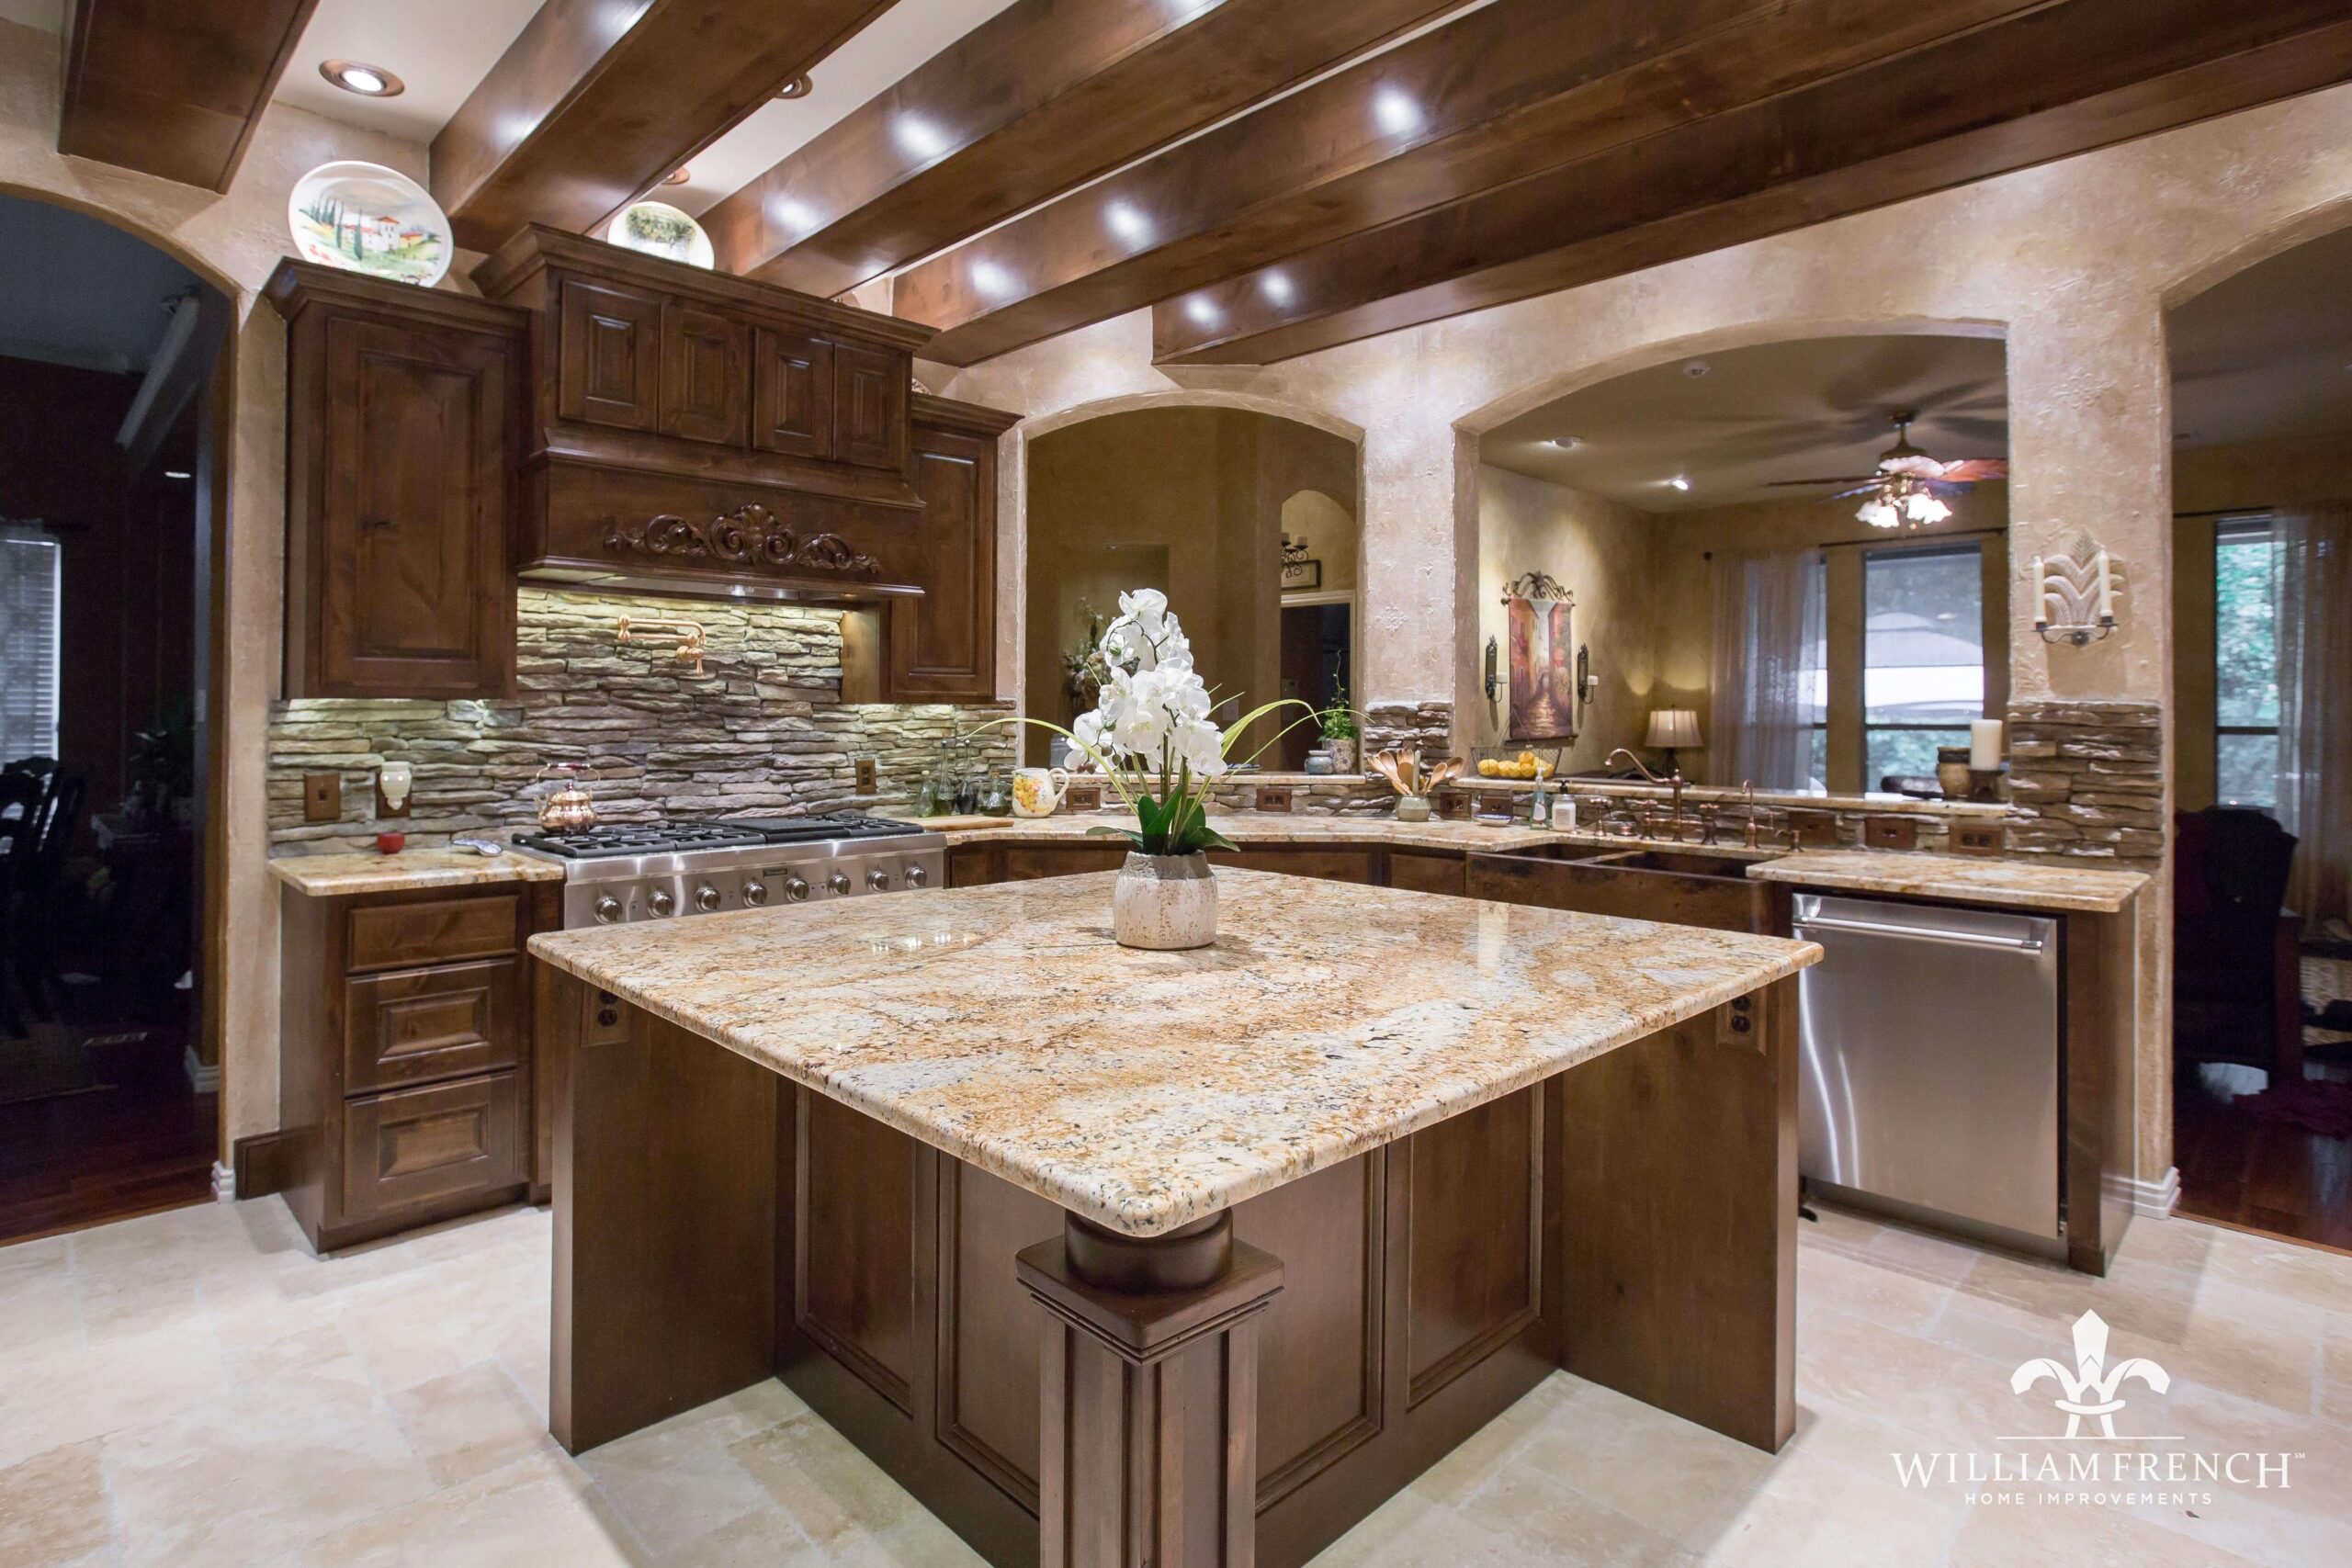 A spacious, elegant kitchen featuring wooden cabinets, a large central island with a granite countertop, and a modern stainless steel stove. The back wall displays a stone backsplash, and a white orchid decorates the island. The ceiling has wooden beams.